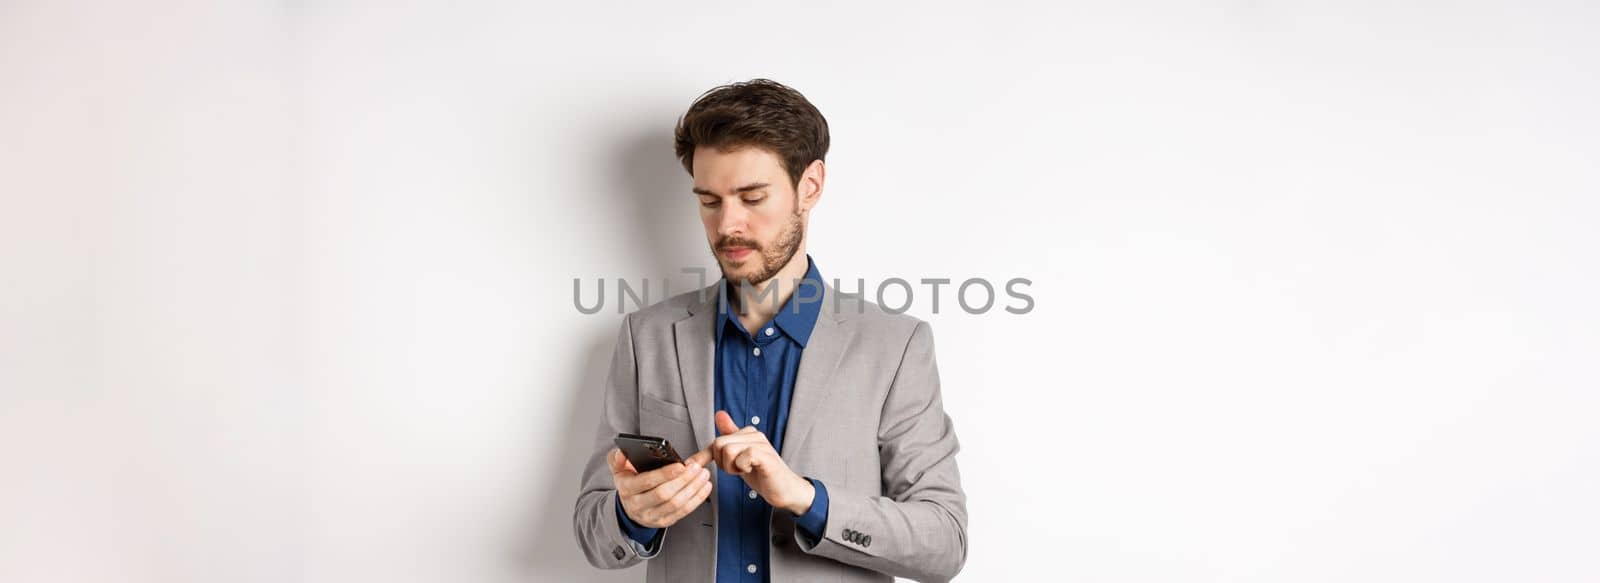 Handsome businessman in stylish suit chatting on smartphone, using mobile phone, standing on white background.